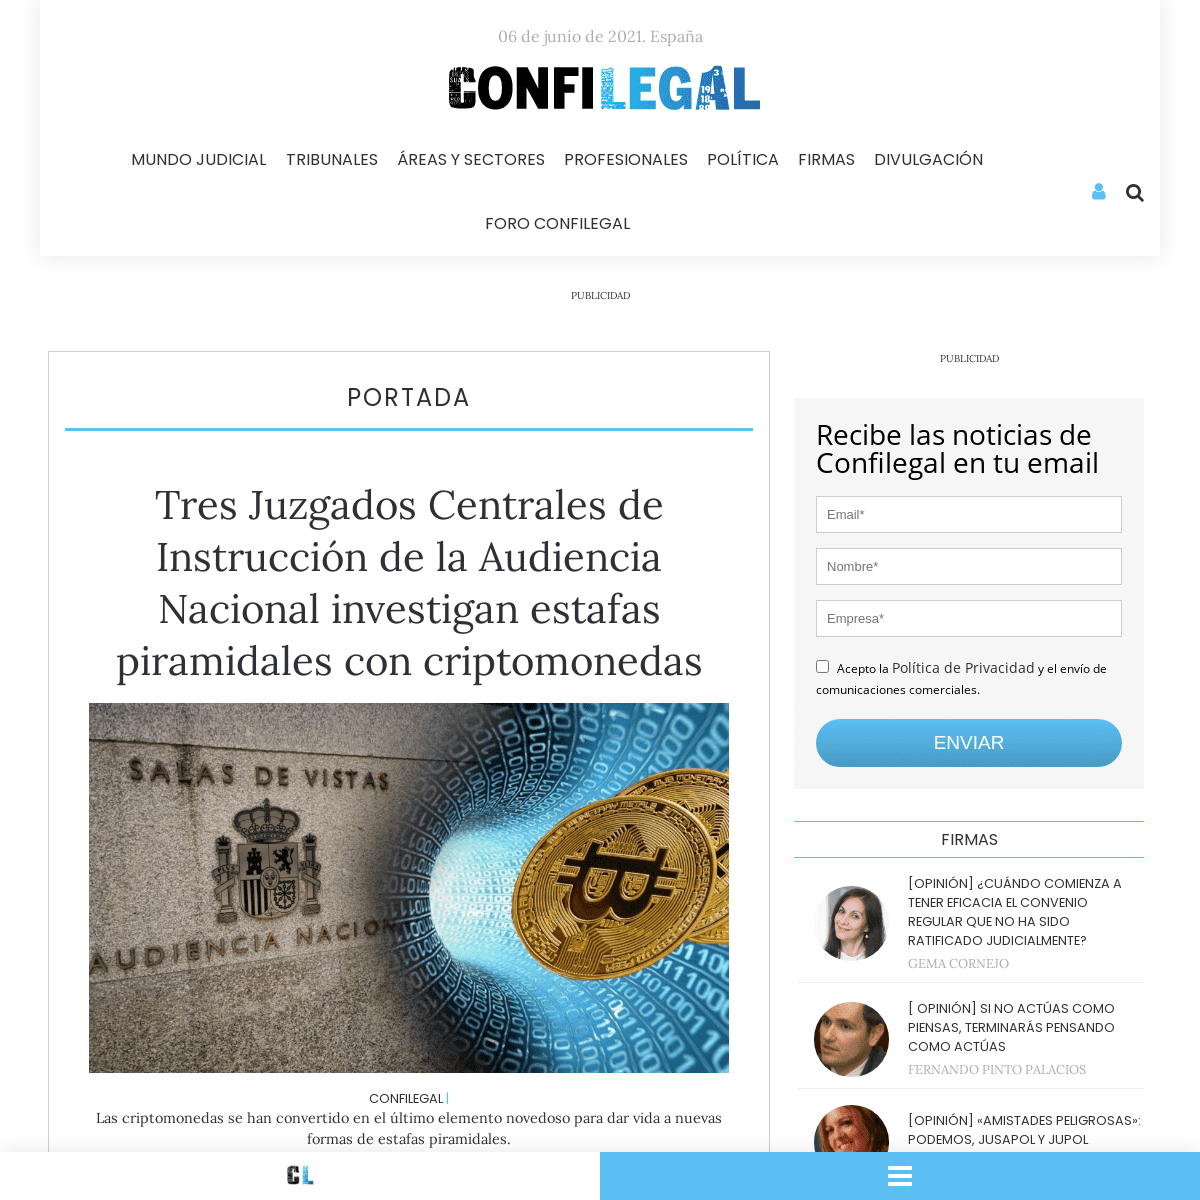 A complete backup of https://confilegal.com